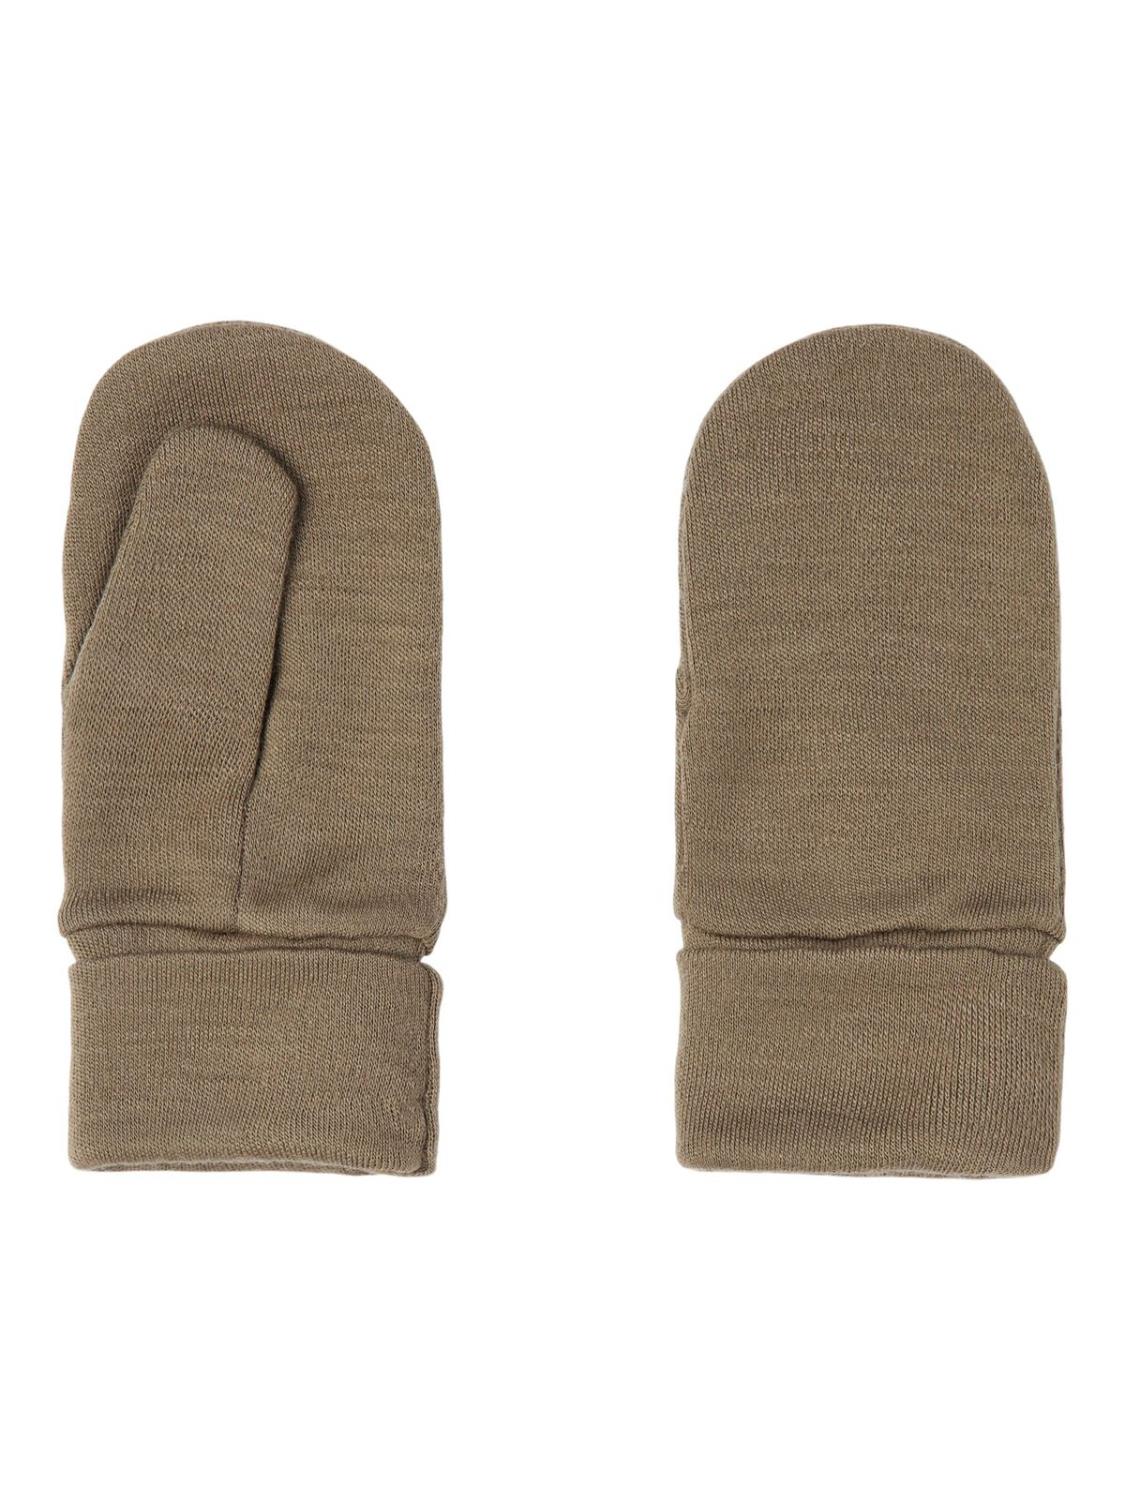 Willit Wool Mittens med tommel - Stone Gray